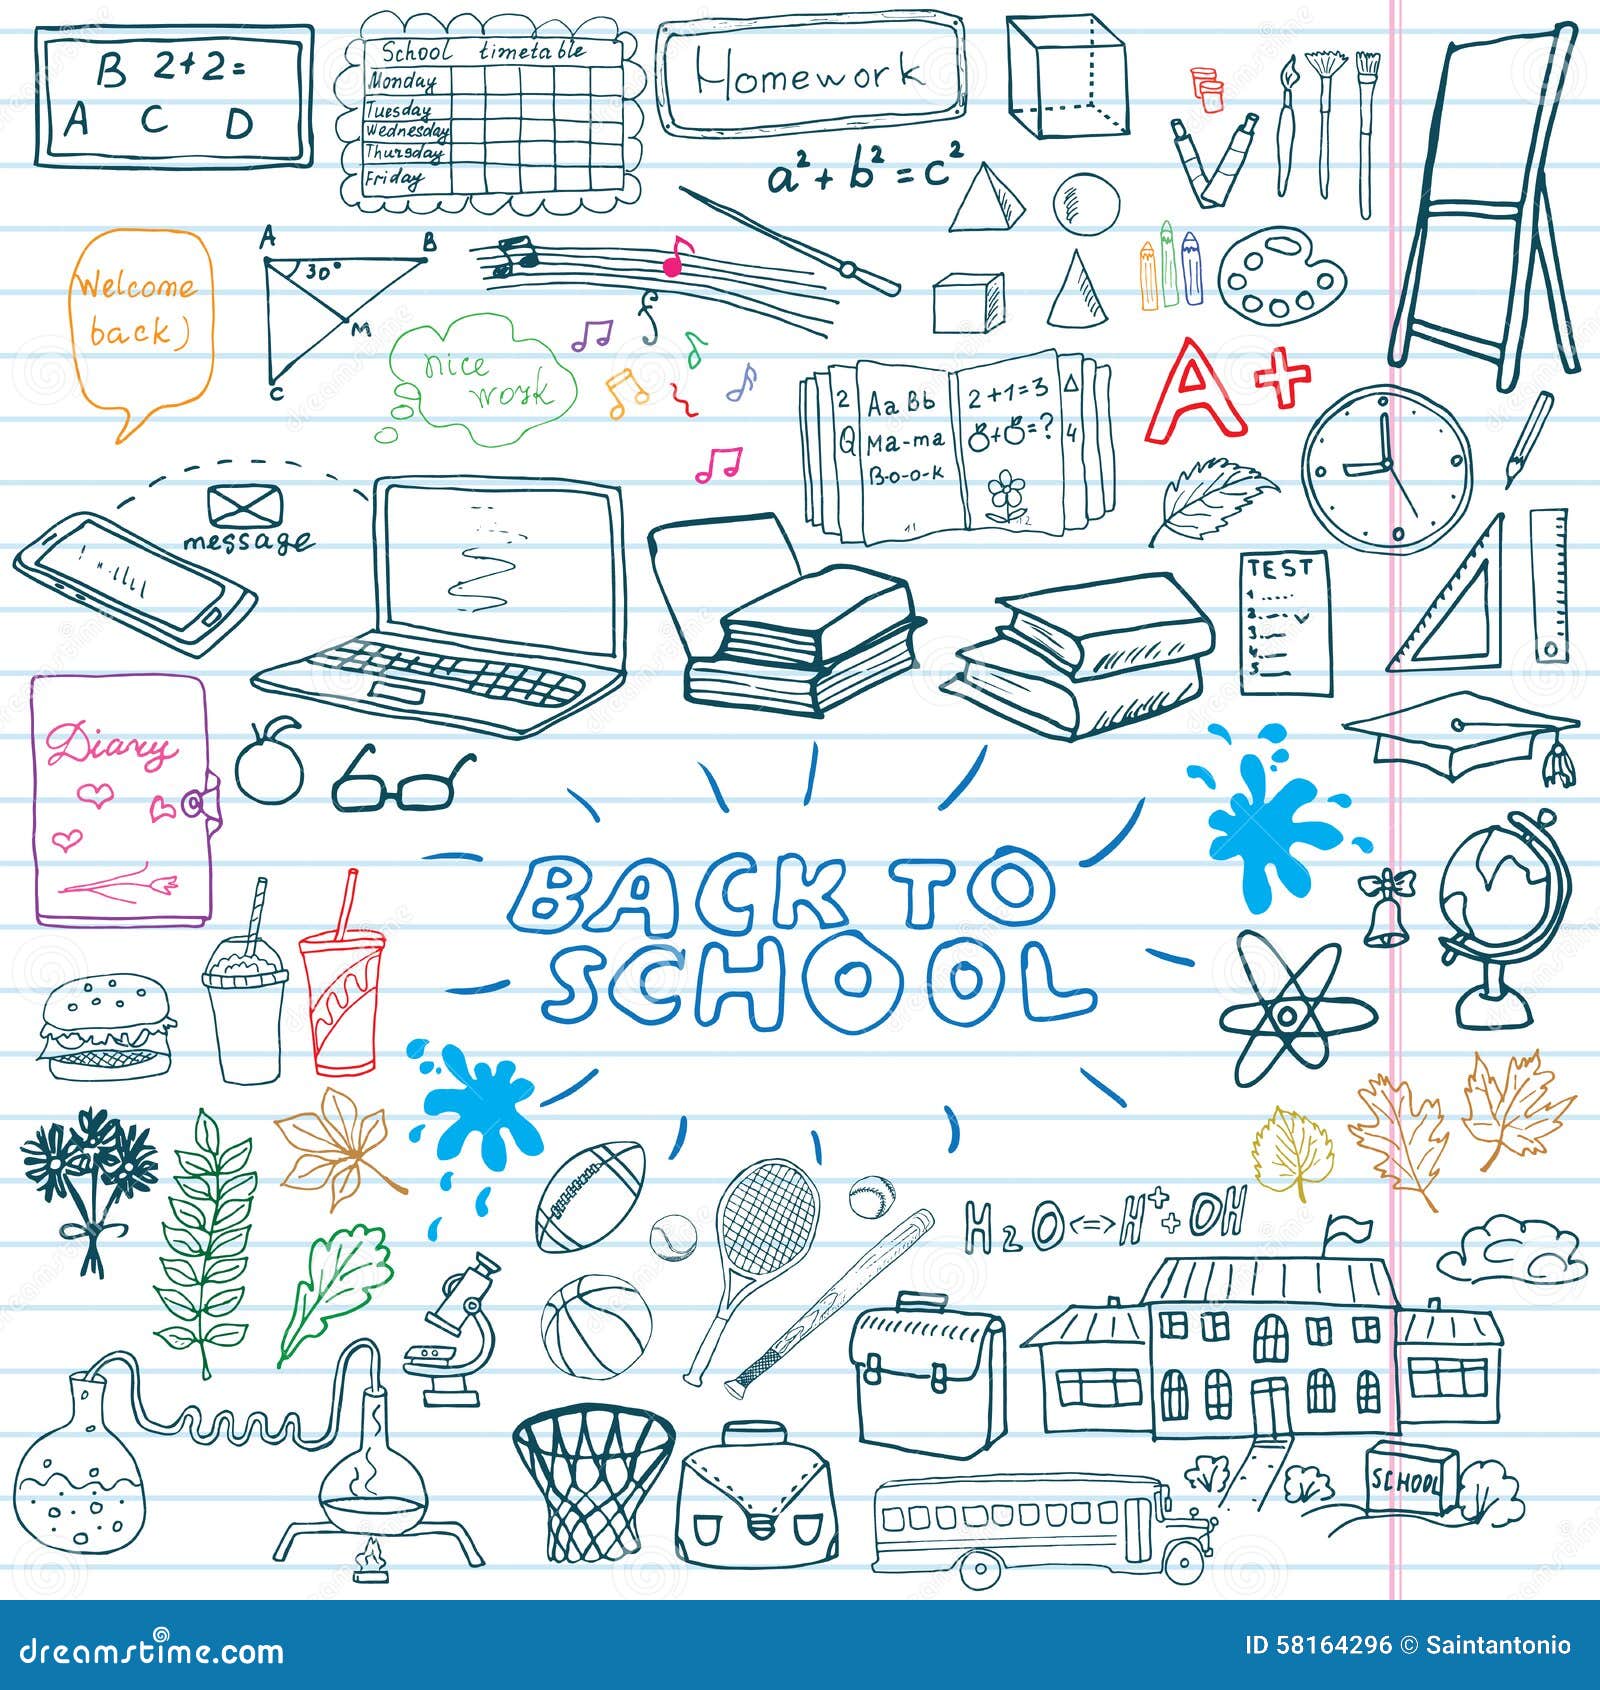 Free Vector  Drawing school items on a notebook